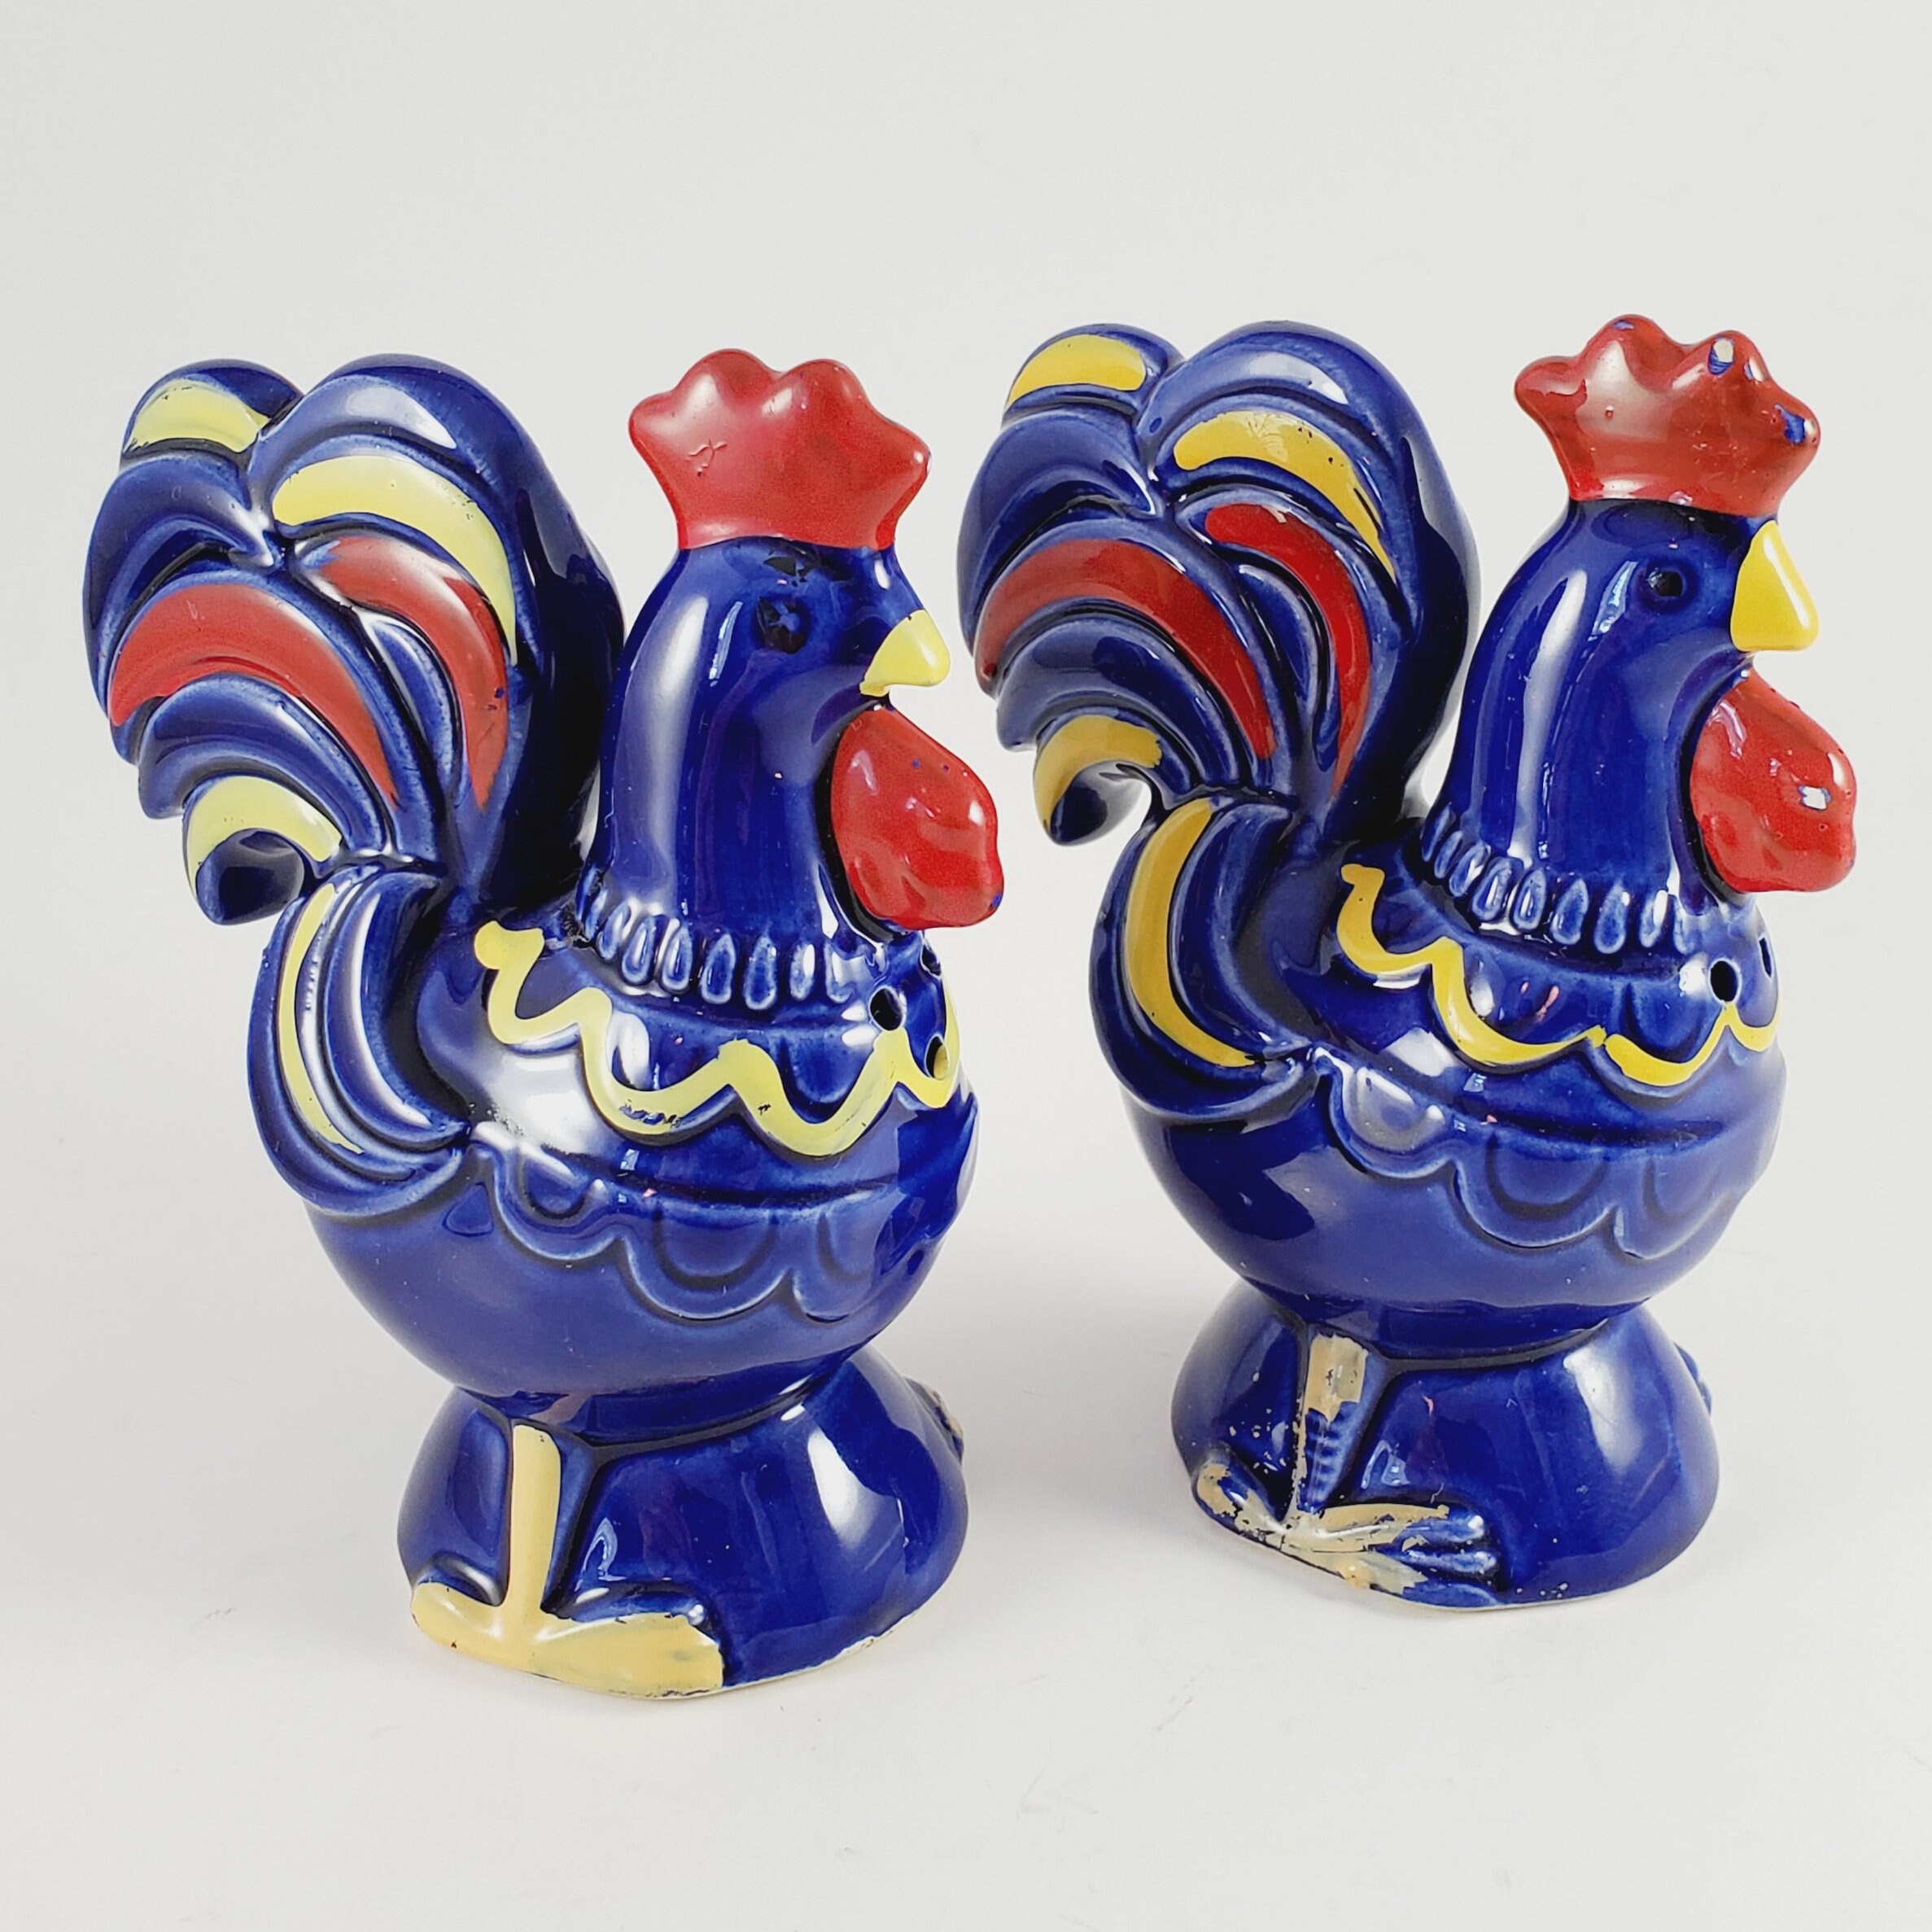 Hen and Rooster Salt and Pepper Shaker - Etsy